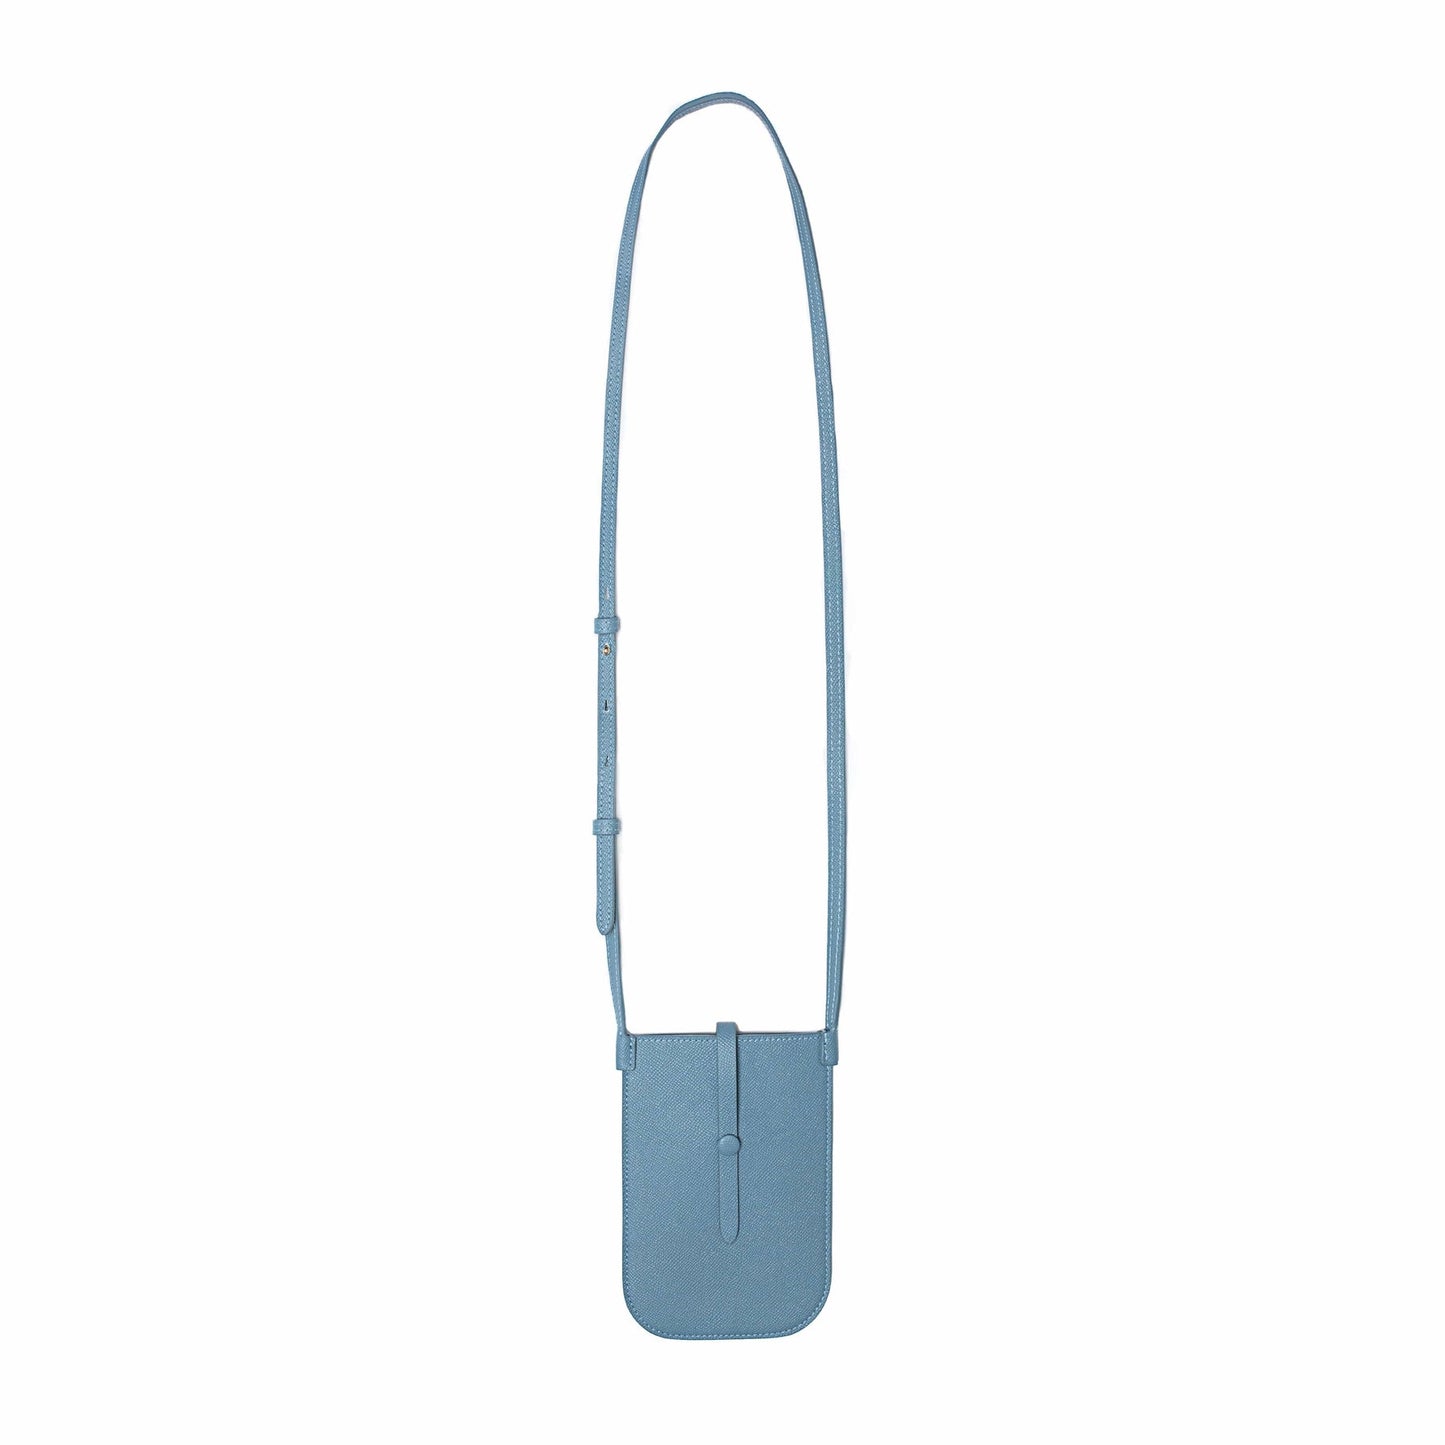 X-NIHILO - CHAMBER PHONE POUCH - BLUE